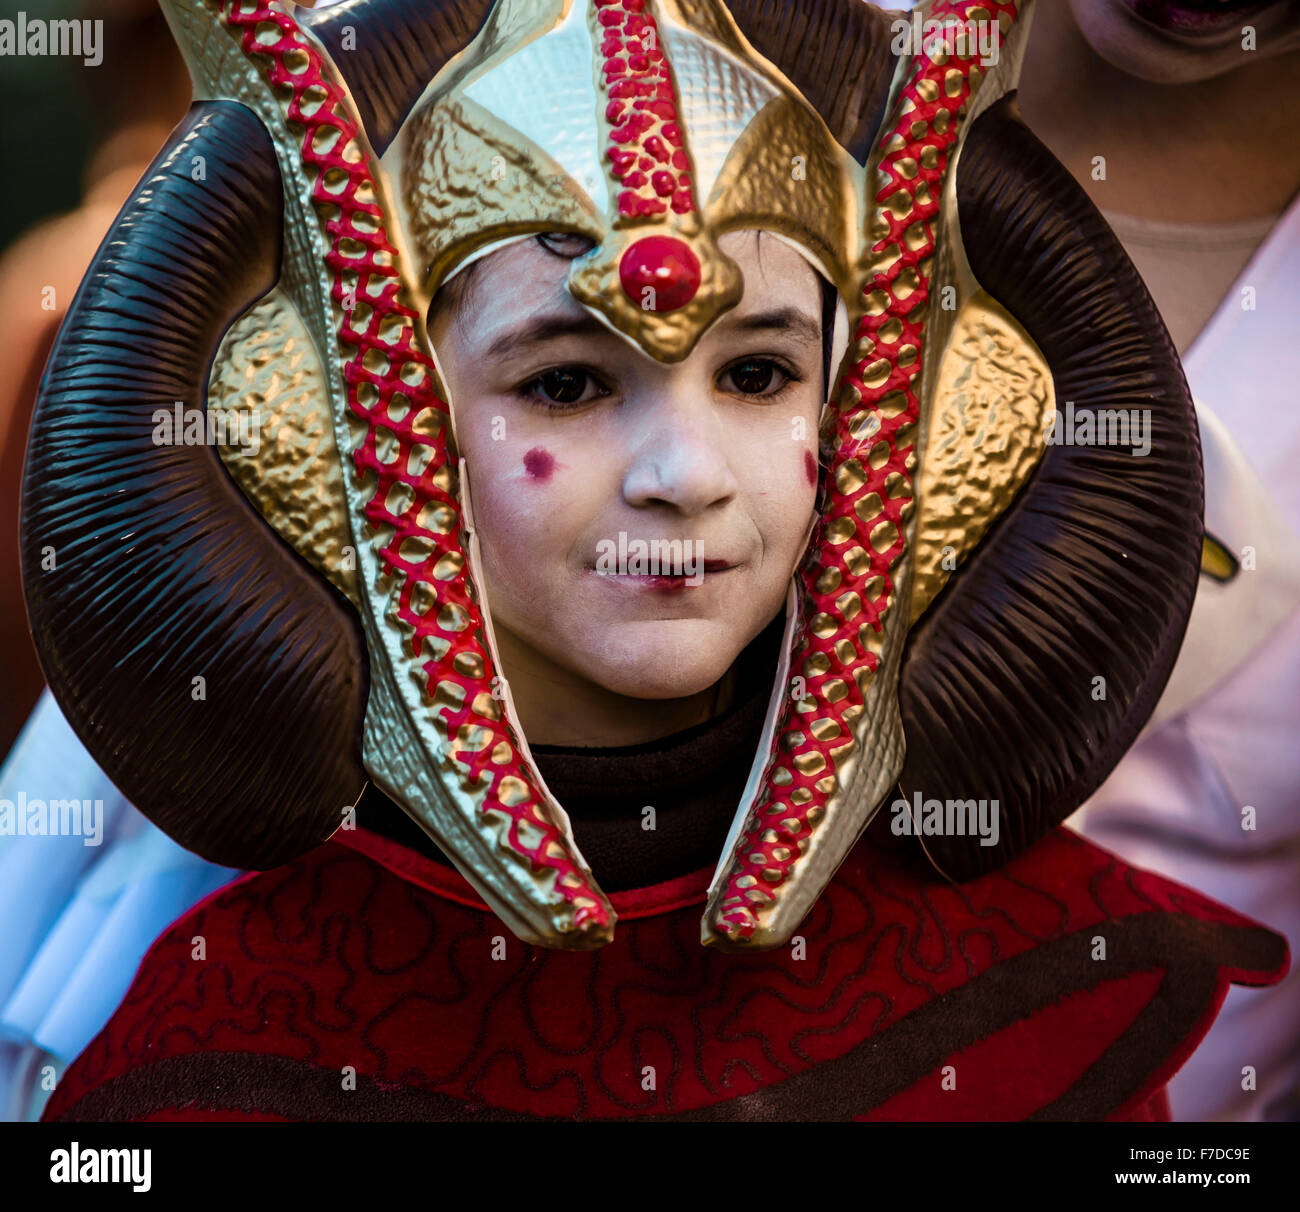 Barcelona, Spain. 29th November, 2015. A girl taking part in the 9th Star Wars parade in front of Barcelona's Arc de Triomf is dressed up as the 'Sabé' movie character Credit:  matthi/Alamy Live News Stock Photo